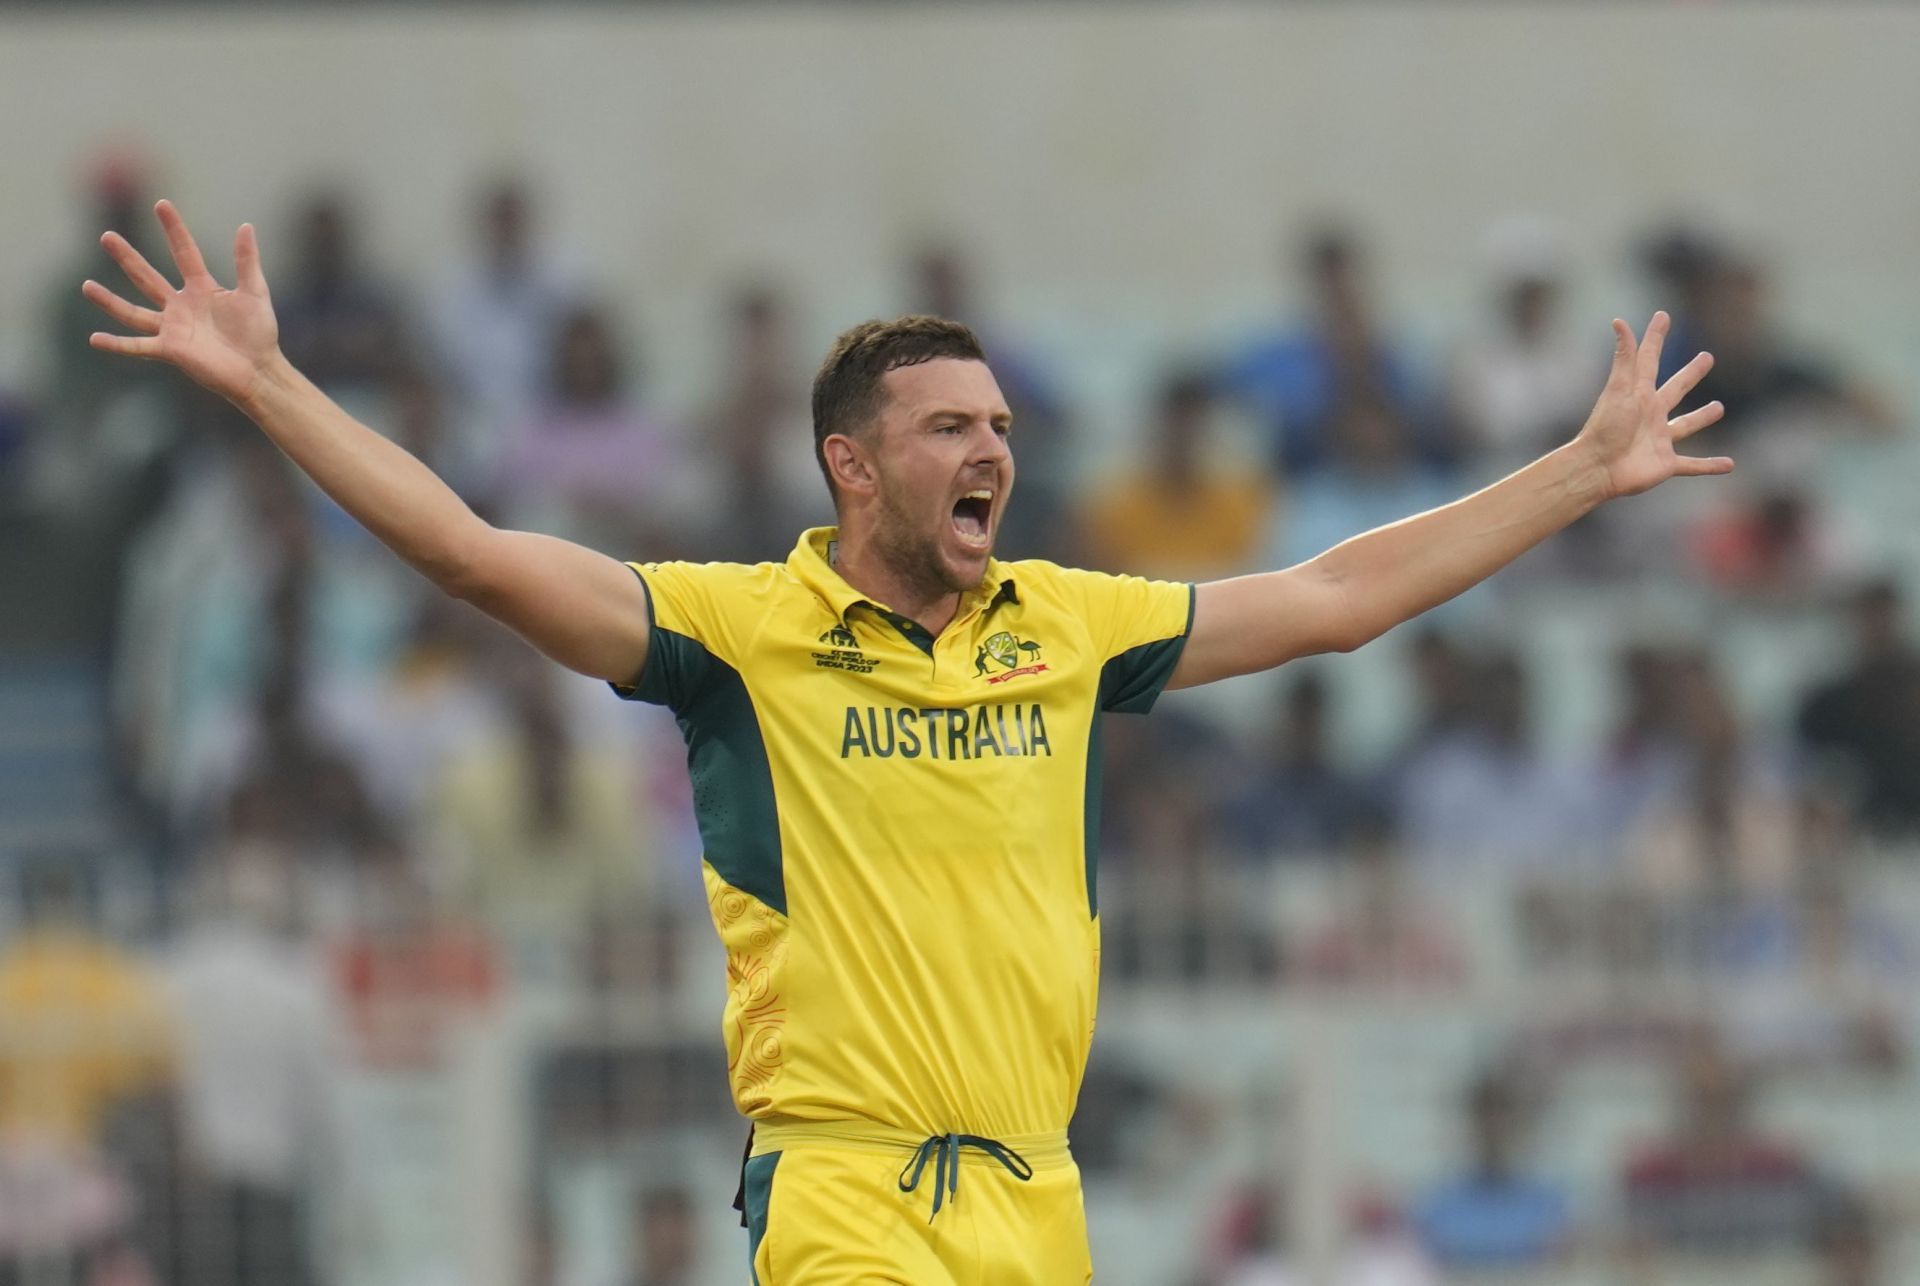 Josh Hazlewood was consistency personified in his first spell